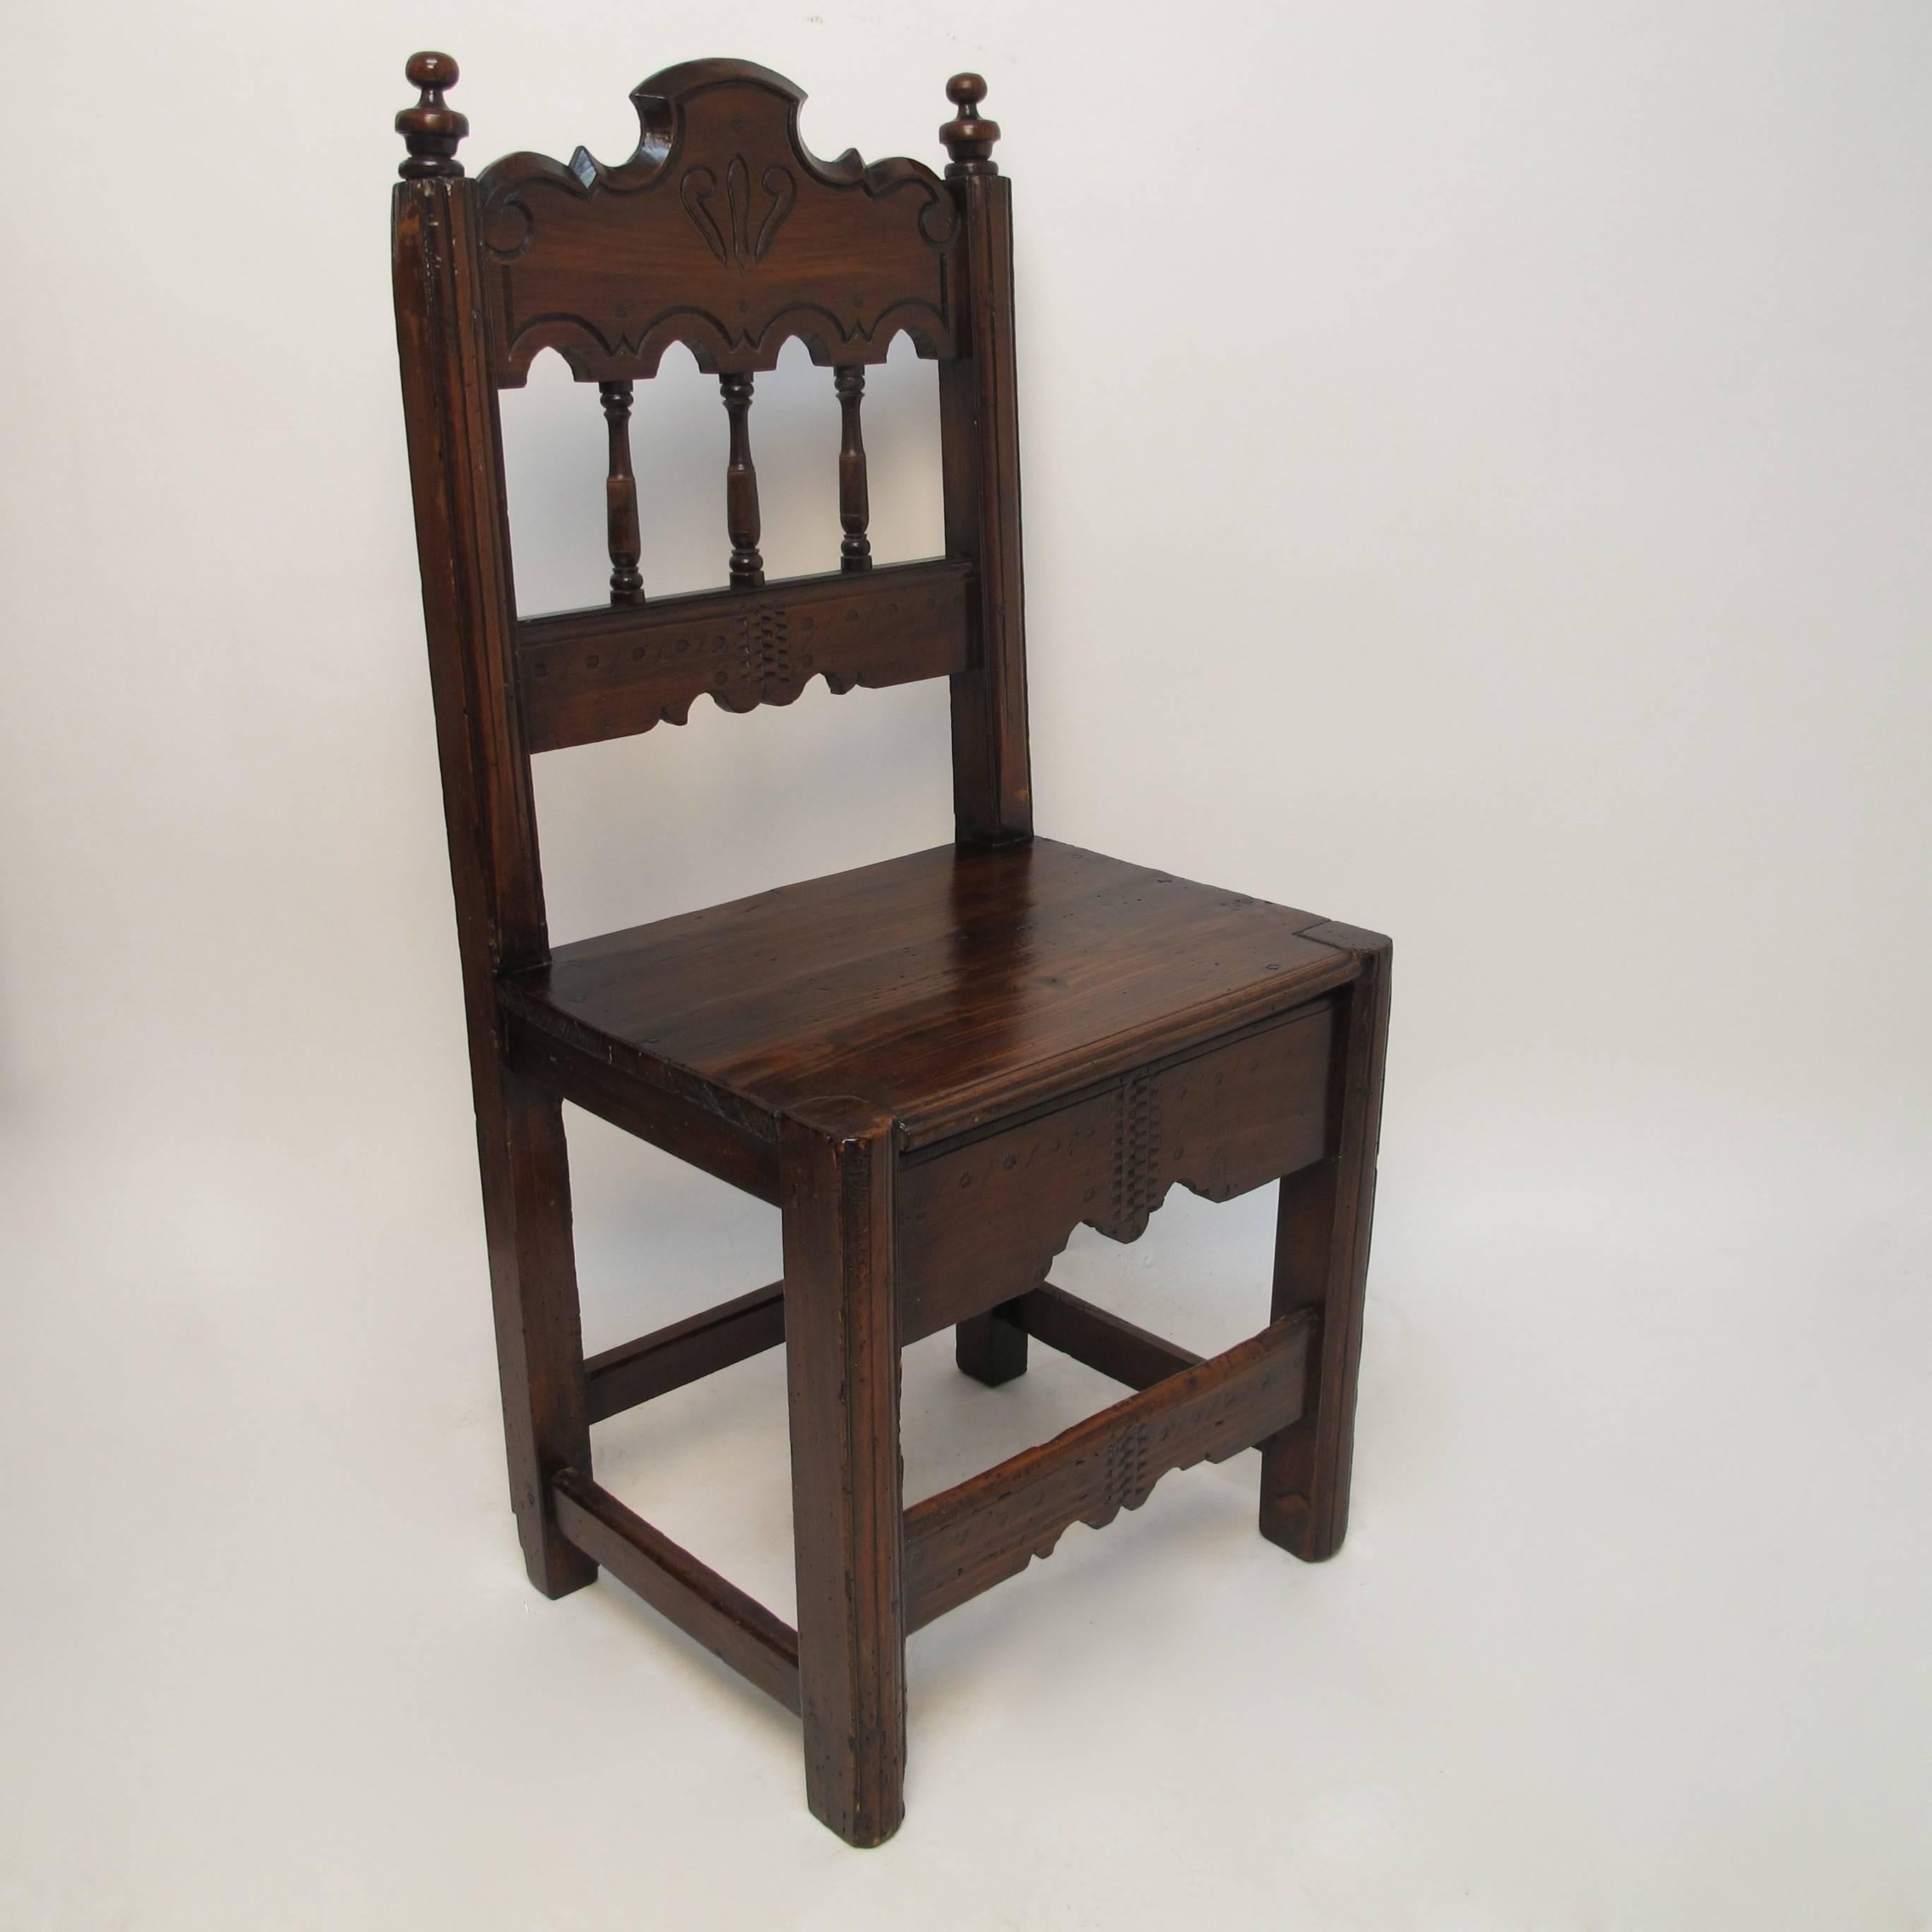 Unique set of four pine dining chairs.  These are two pairs of near identical dining chairs with carved top rails with spindles connecting lower rail.  The seats are plank with a carved apron.  Latin American, Circa 1820.